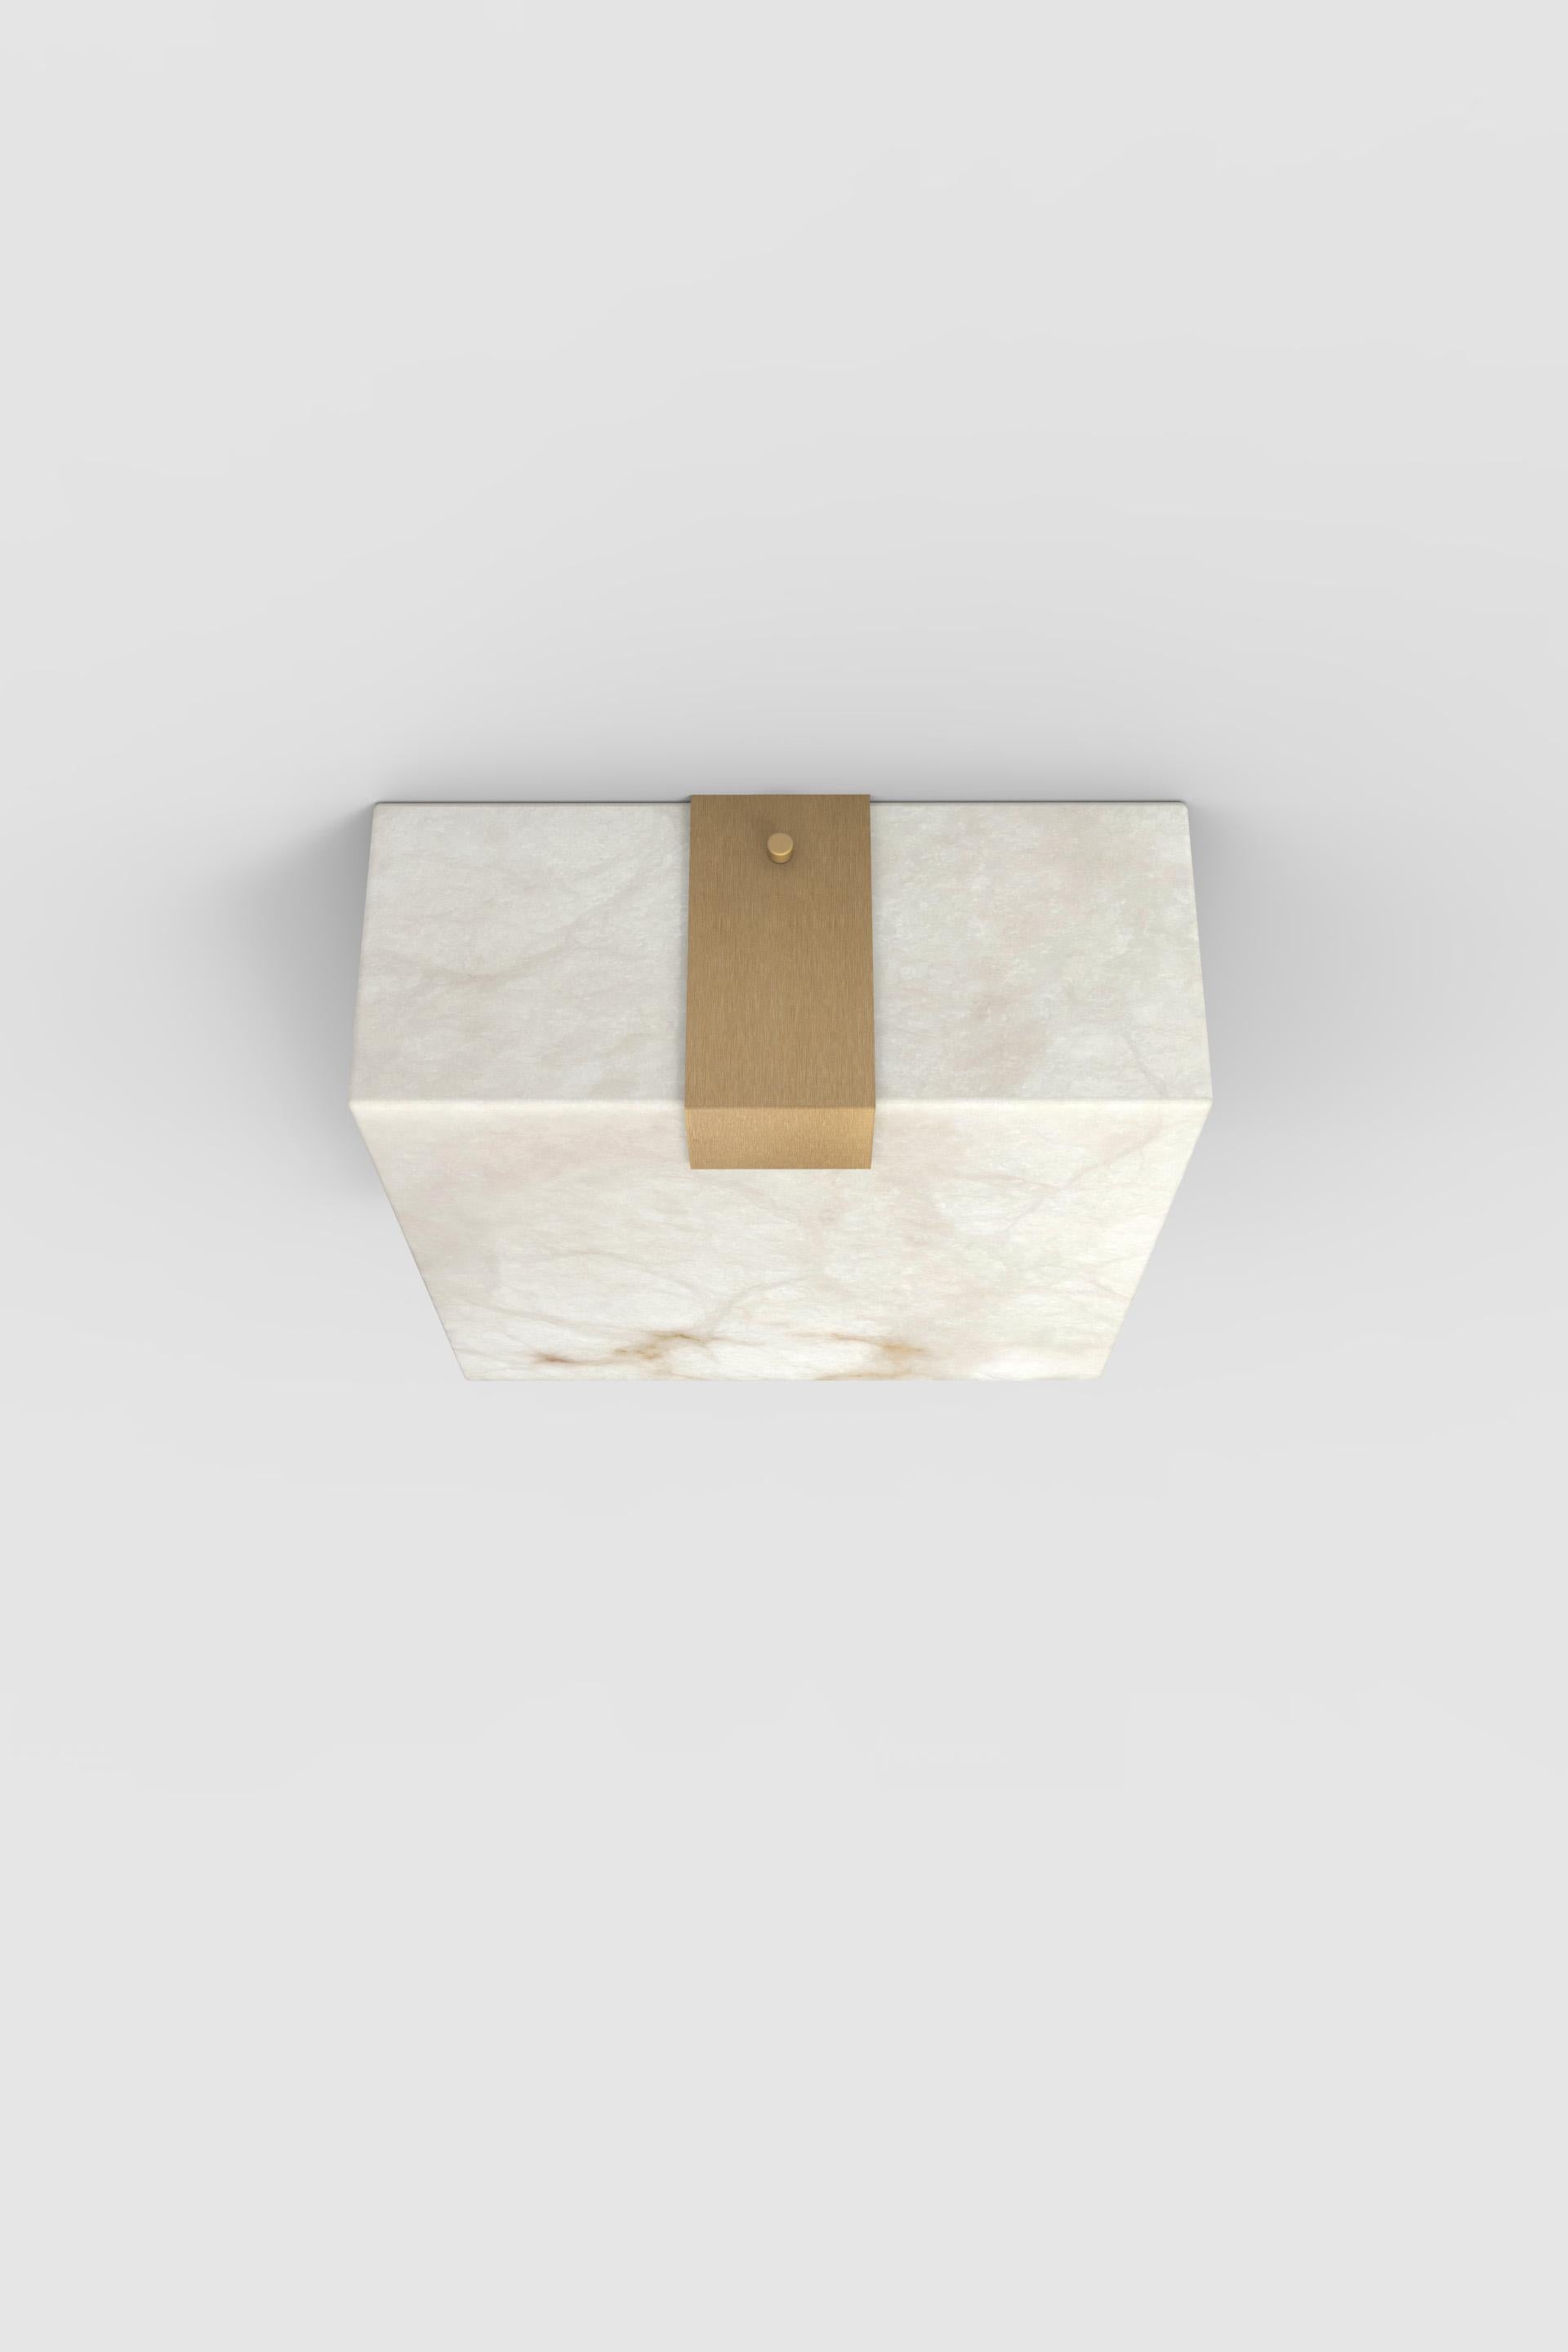 Post-Modern Contemporary Ponti Flush Mount 002A-1C in Alabaster by Orphan Work For Sale